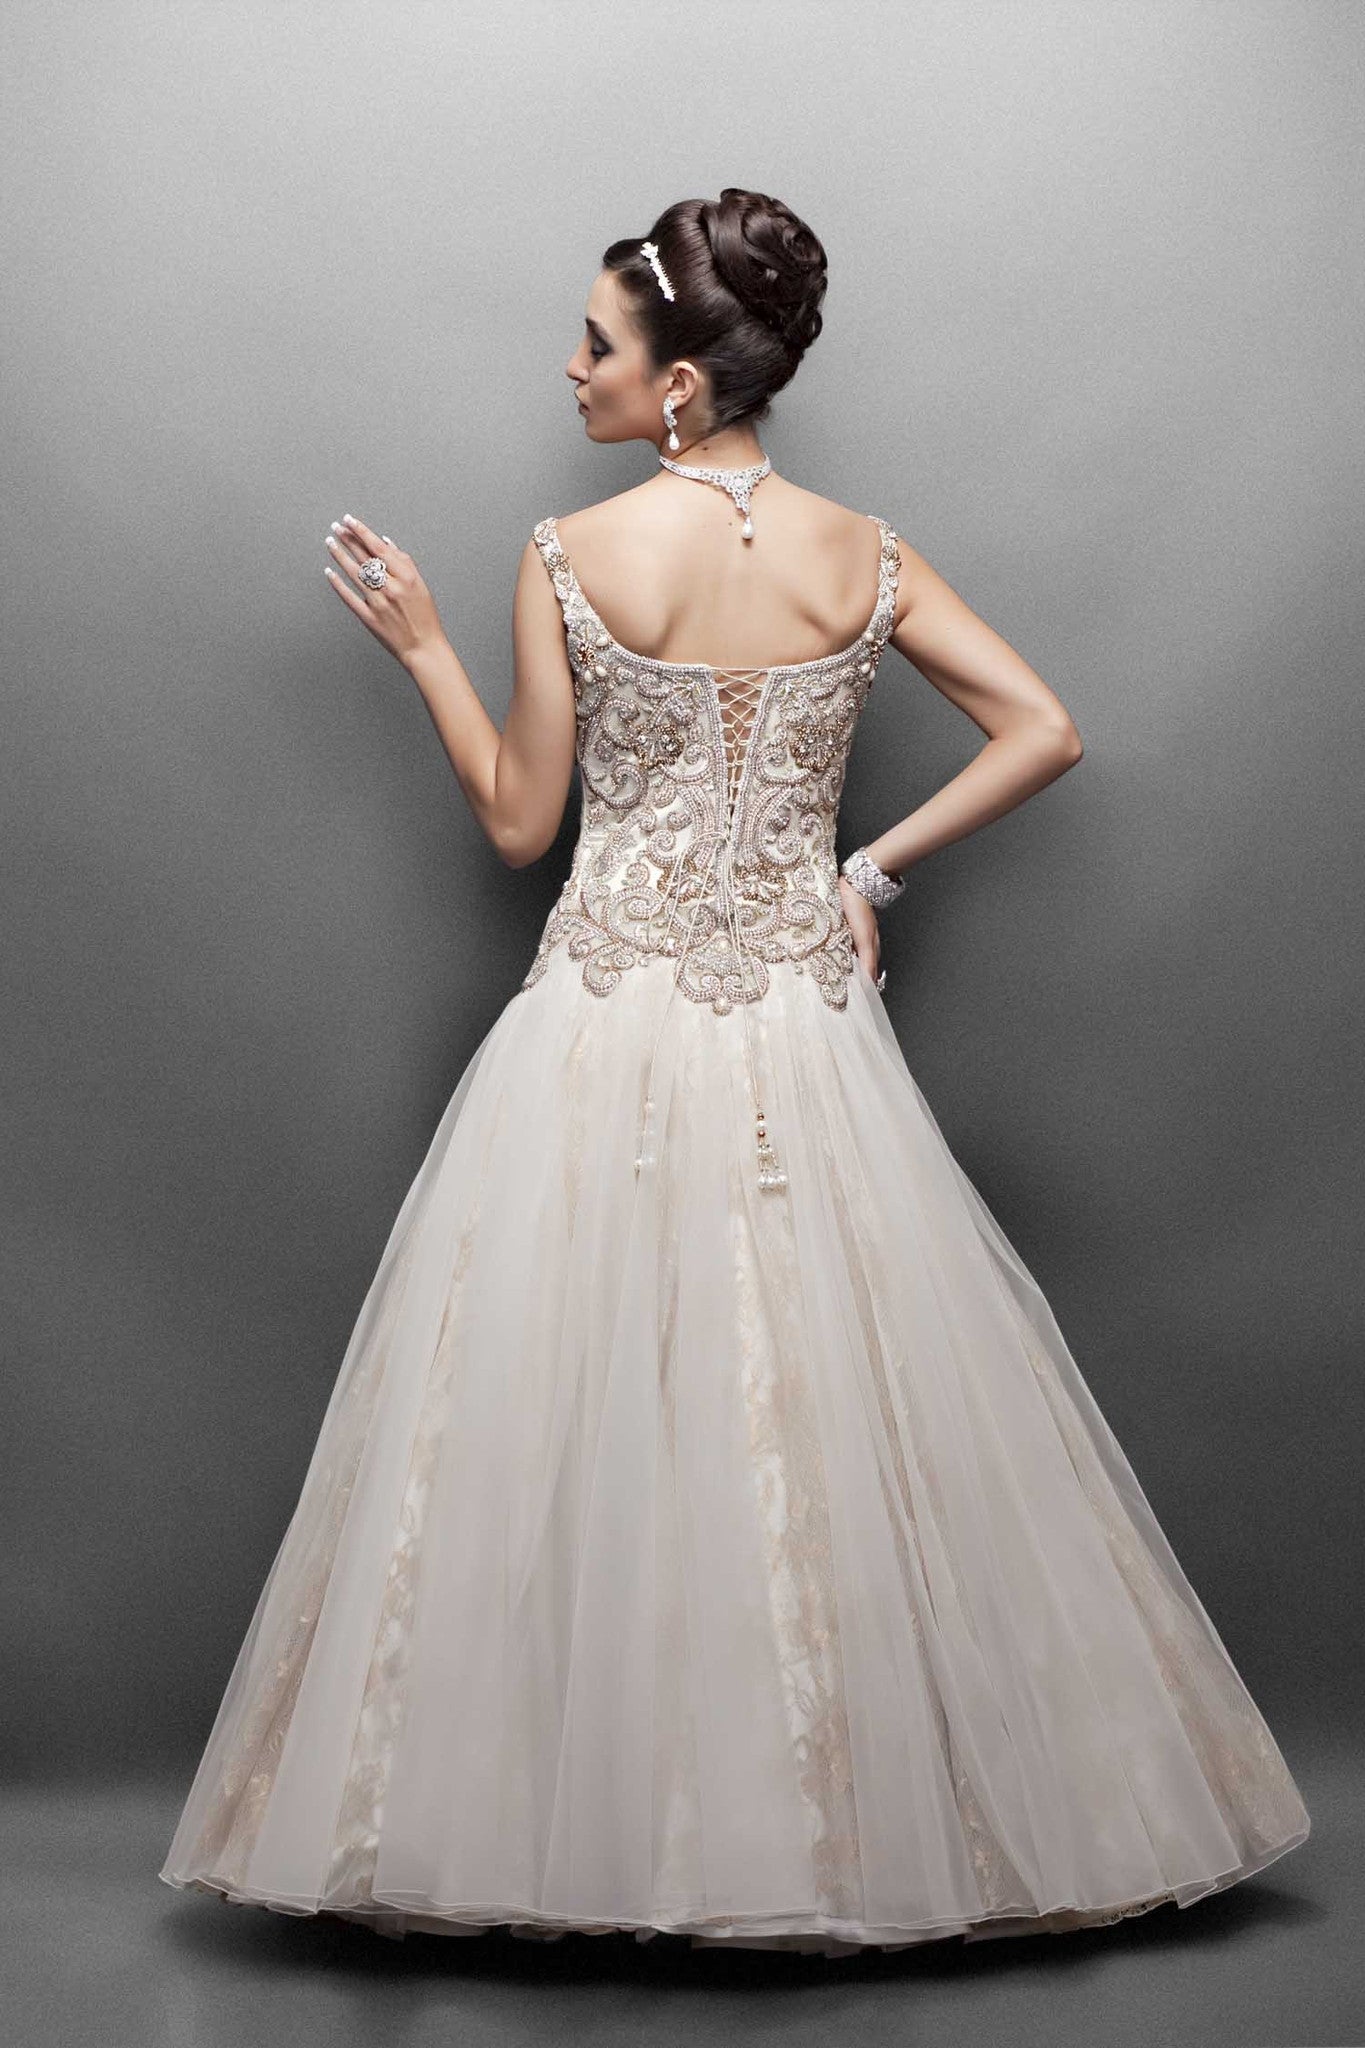 Offwhite color Indo western bridal gown